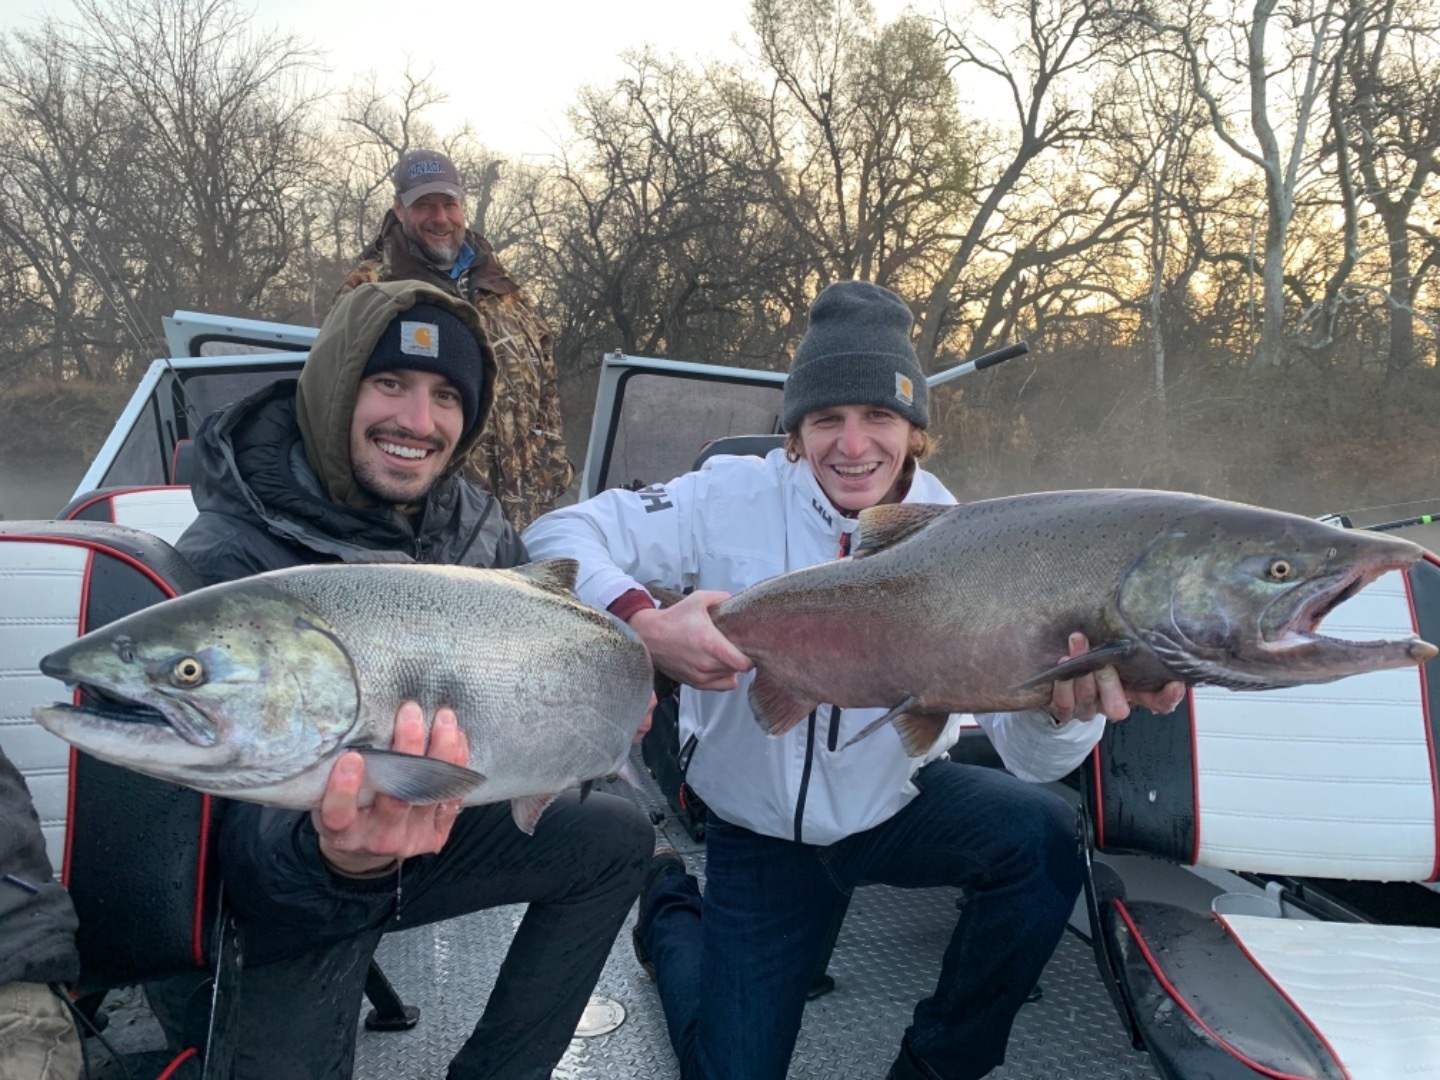 Last day for 2020 salmon fishing!!!